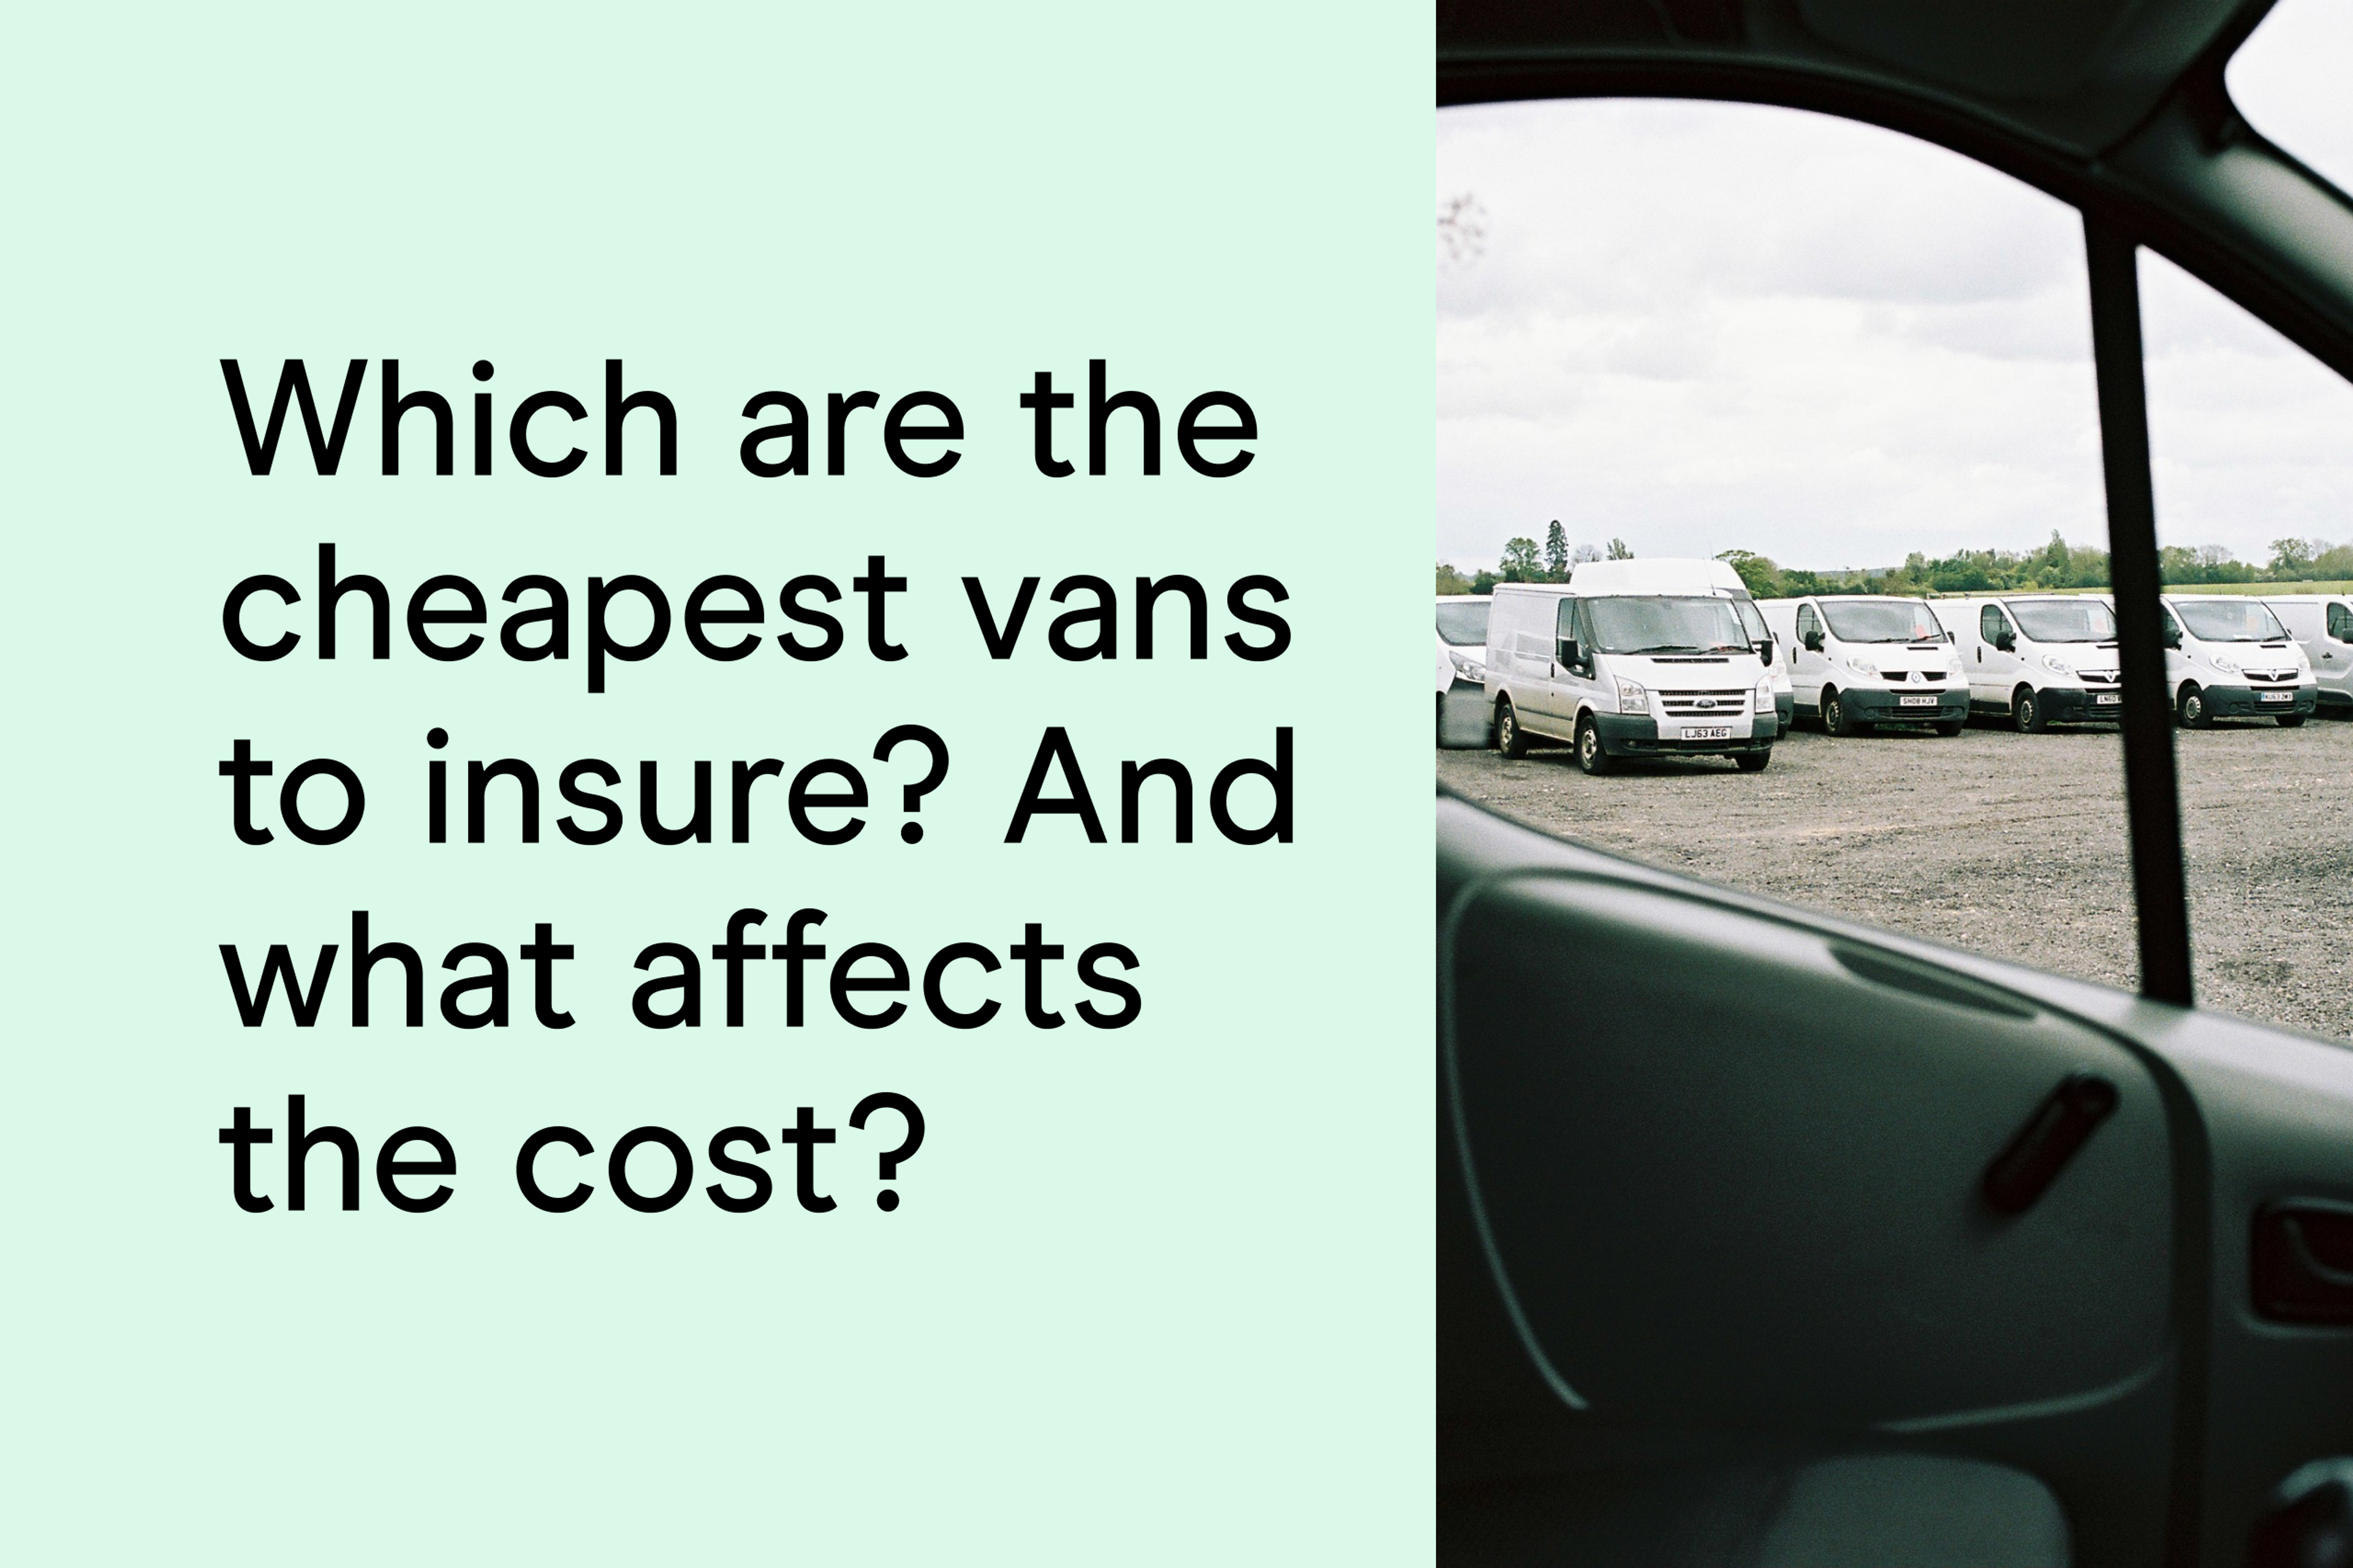 Which are the cheapest vans to insure? And what affects the cost?